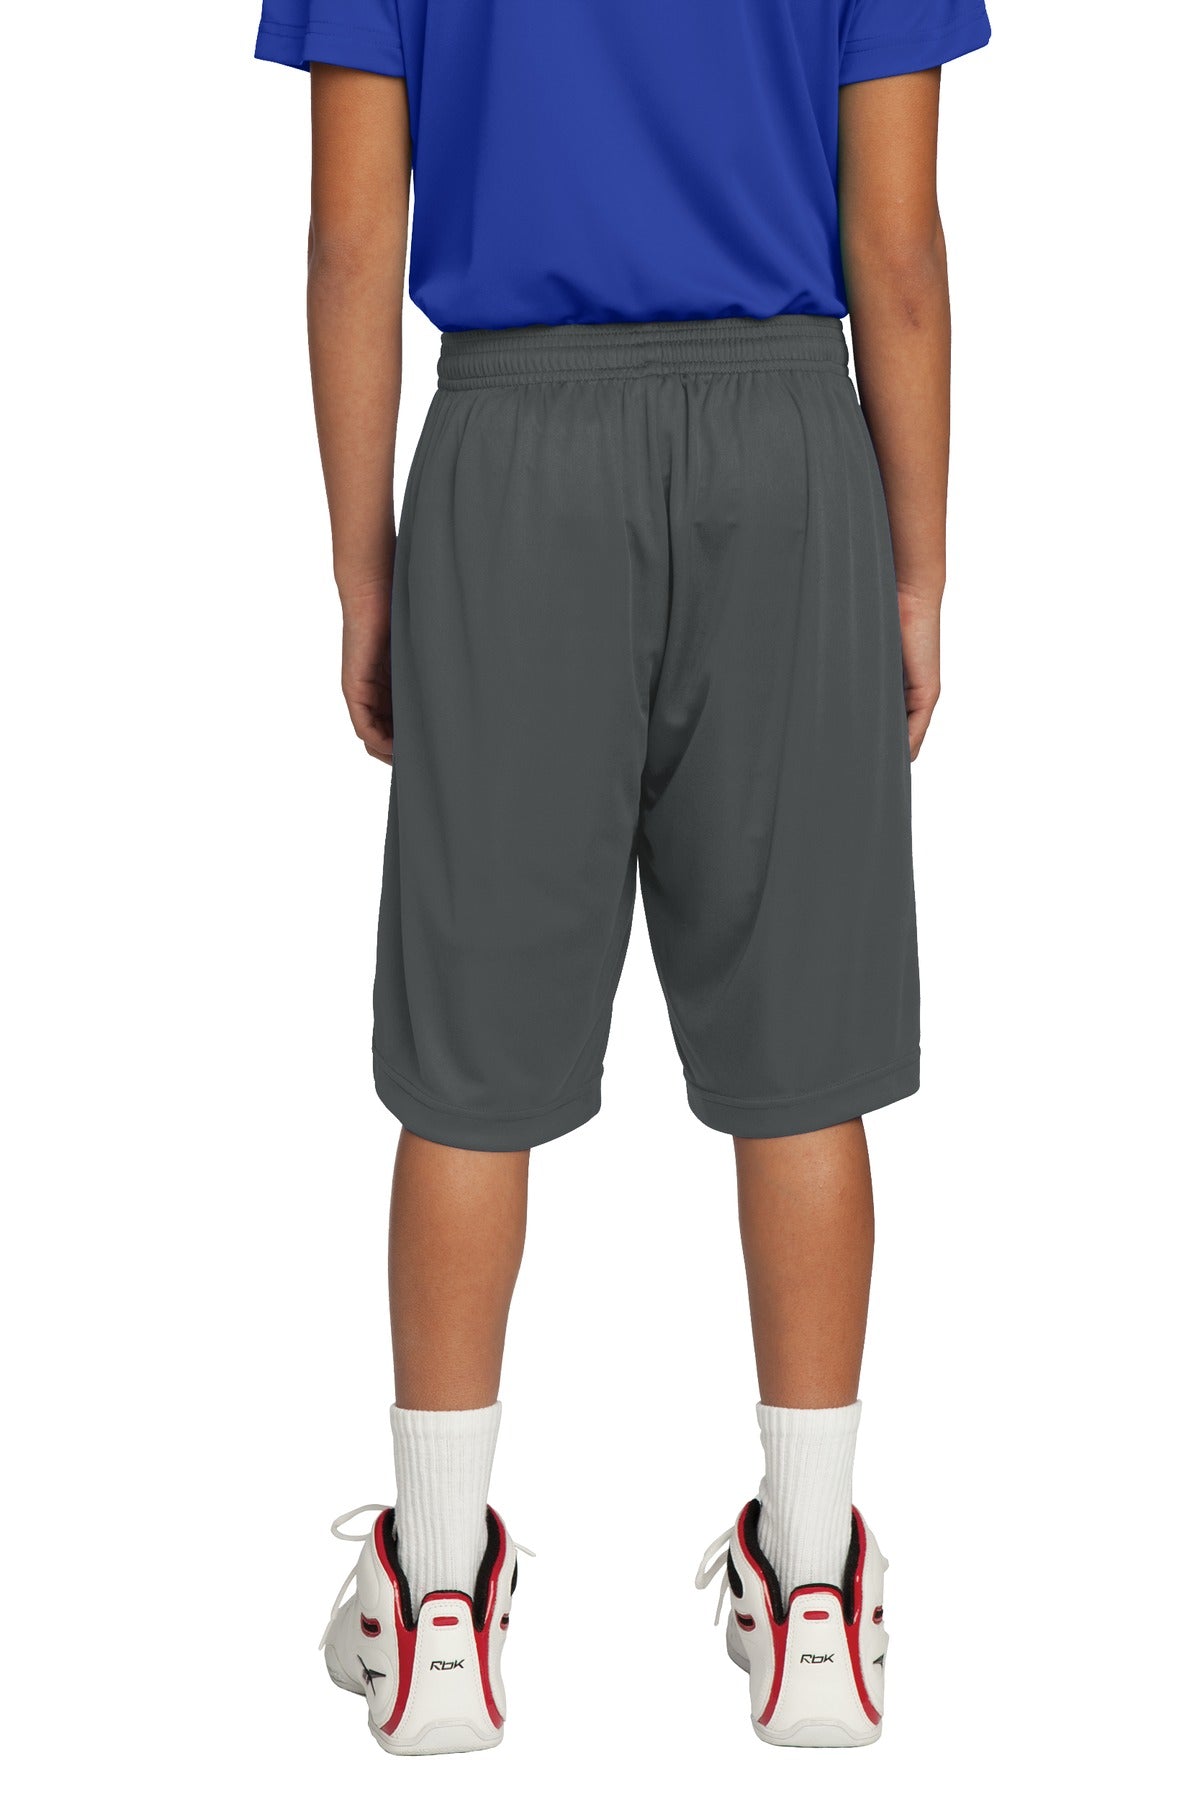 Sport-Tek Youth PosiCharge Competitor™ Short. YST355